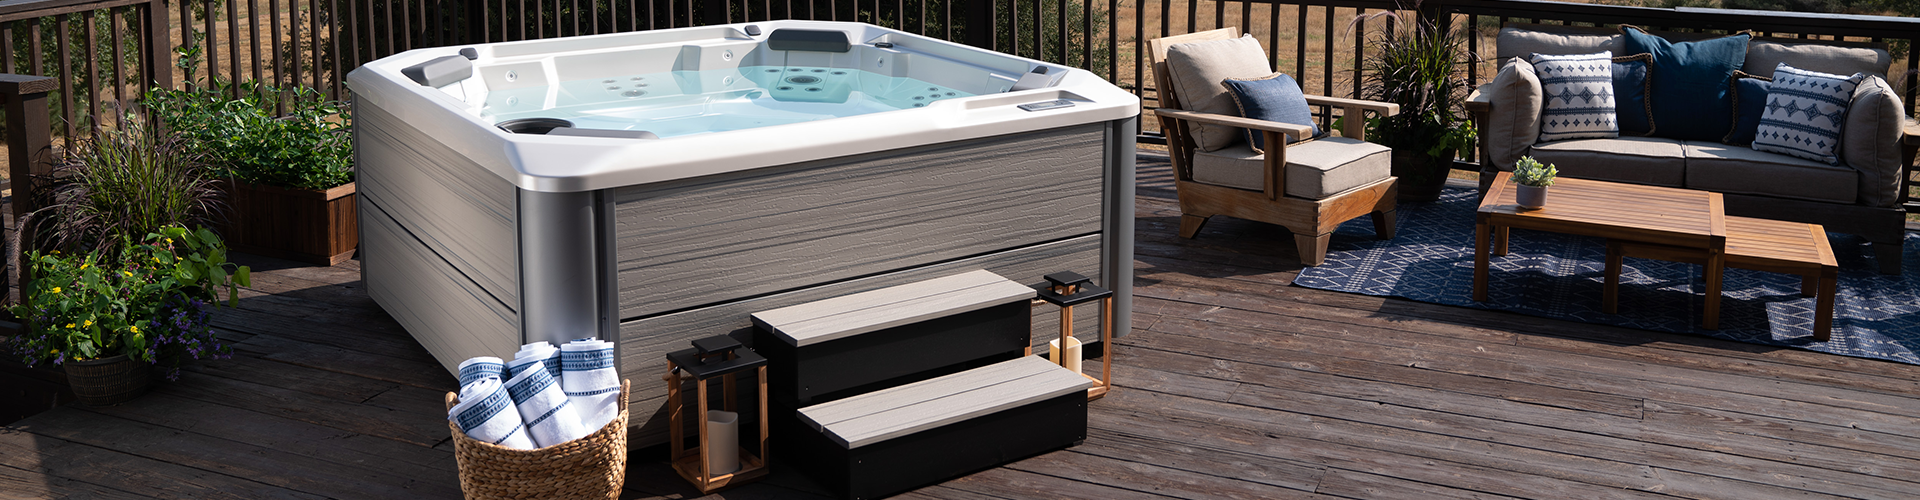 What you need to know to prepare for the Wiring of your 220V, 230V, or 240V Hot Tub